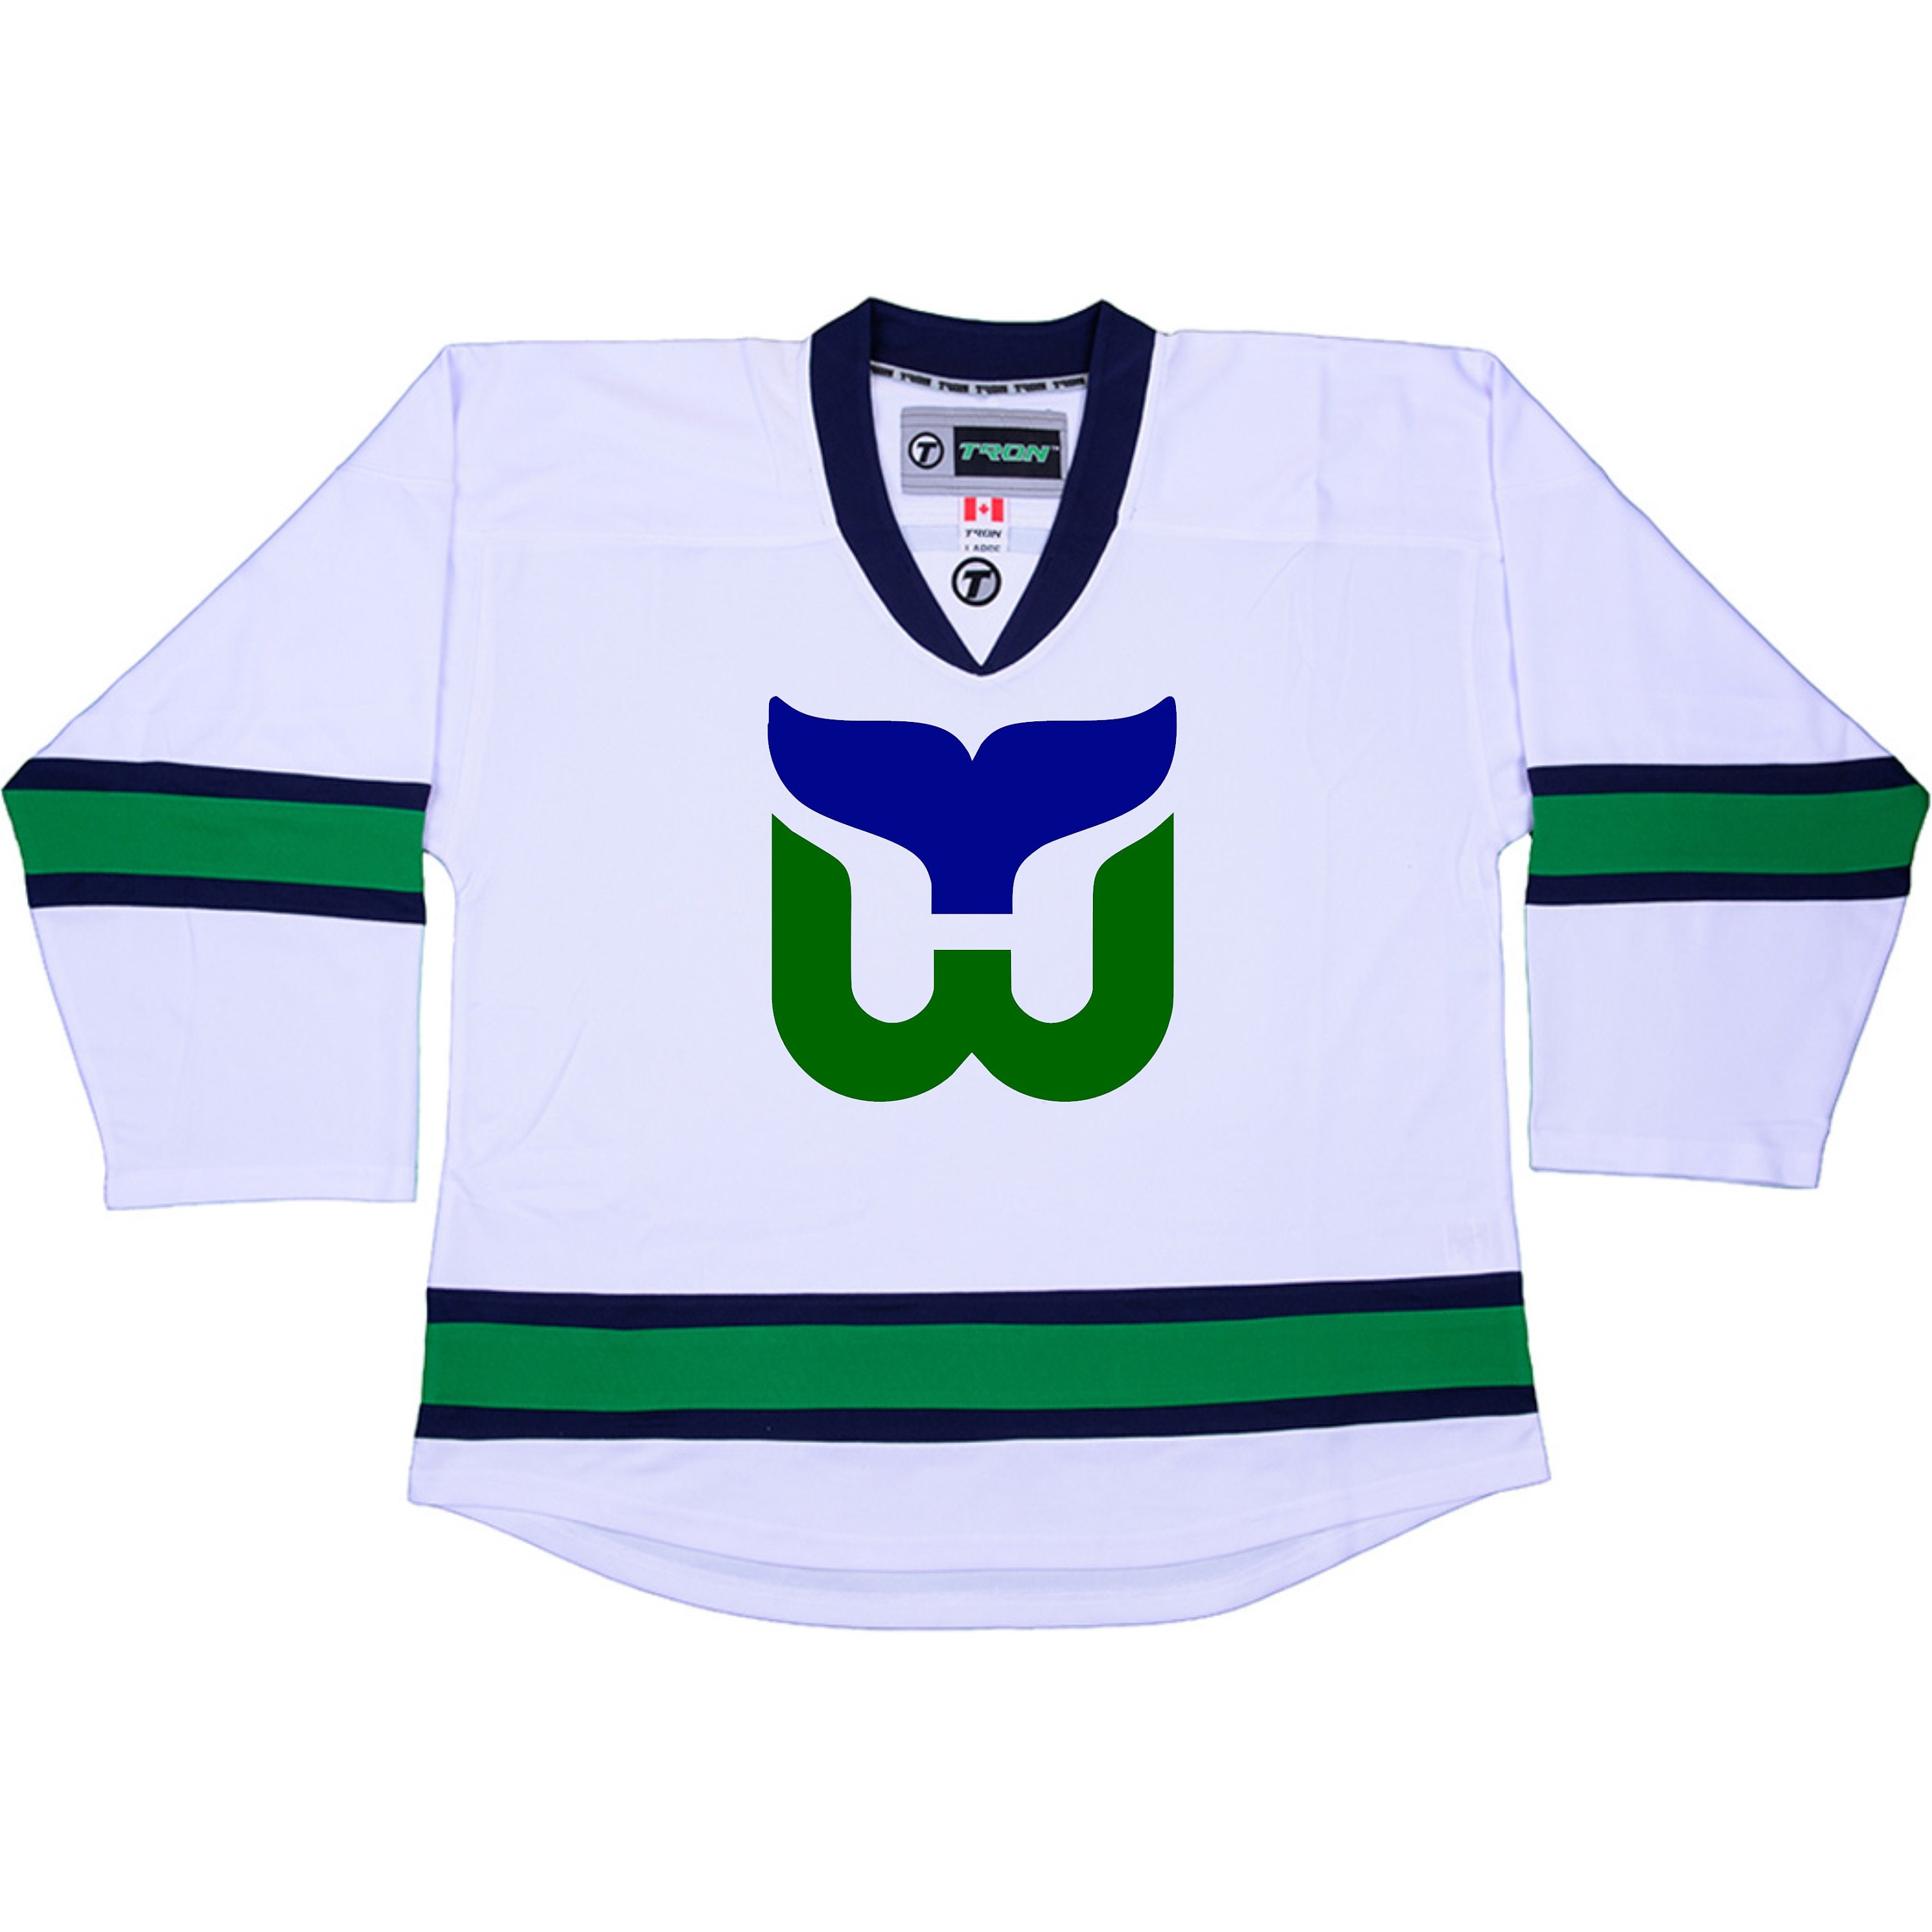 RON FRANCIS  Hartford Whalers 1986 Home CCM Vintage Throwback NHL Hockey  Jersey